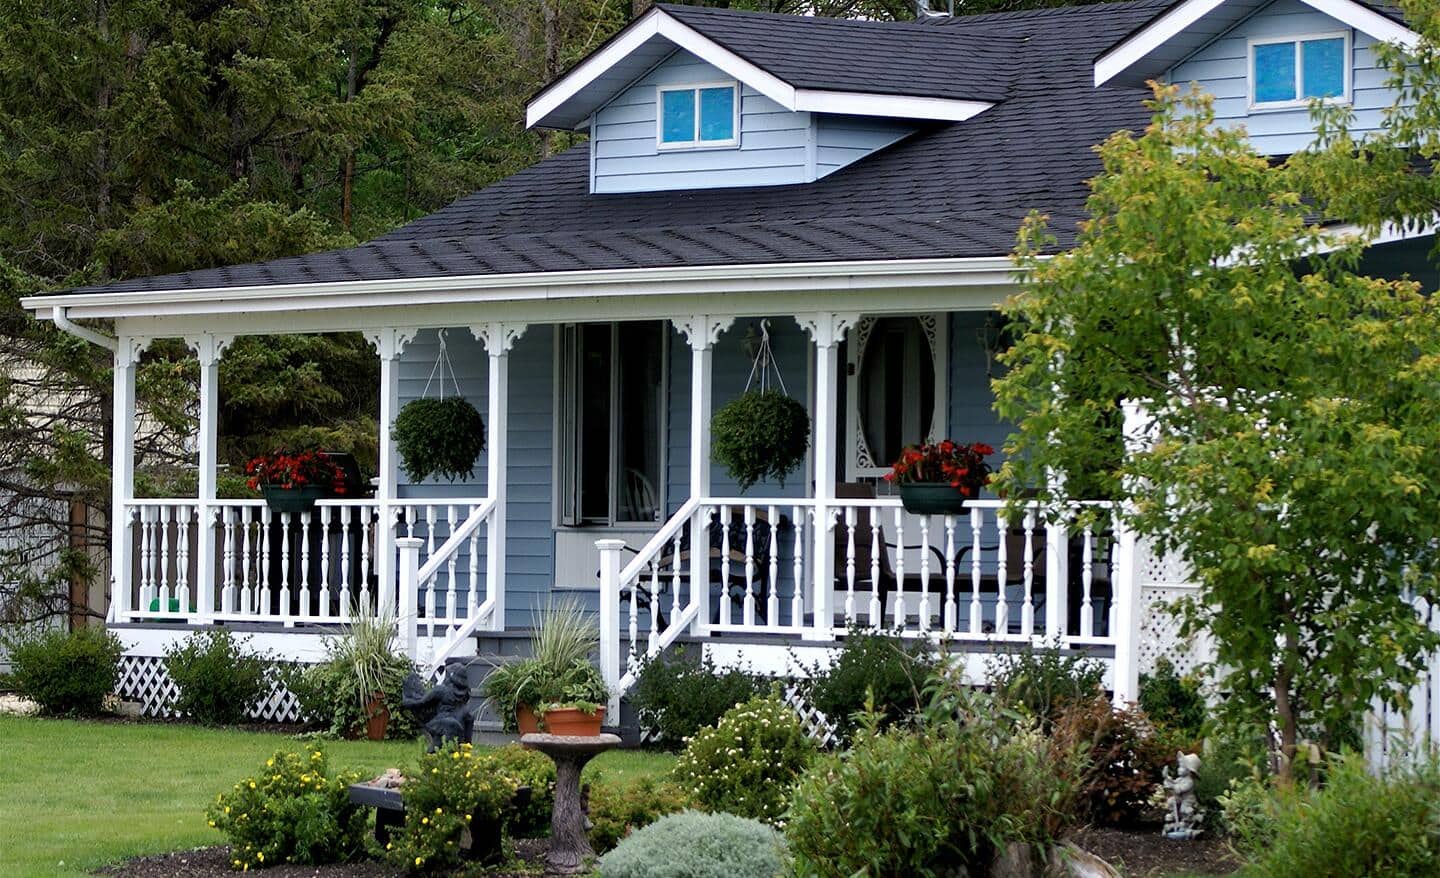 A white picket fence surrounds the front yard of a cottage.